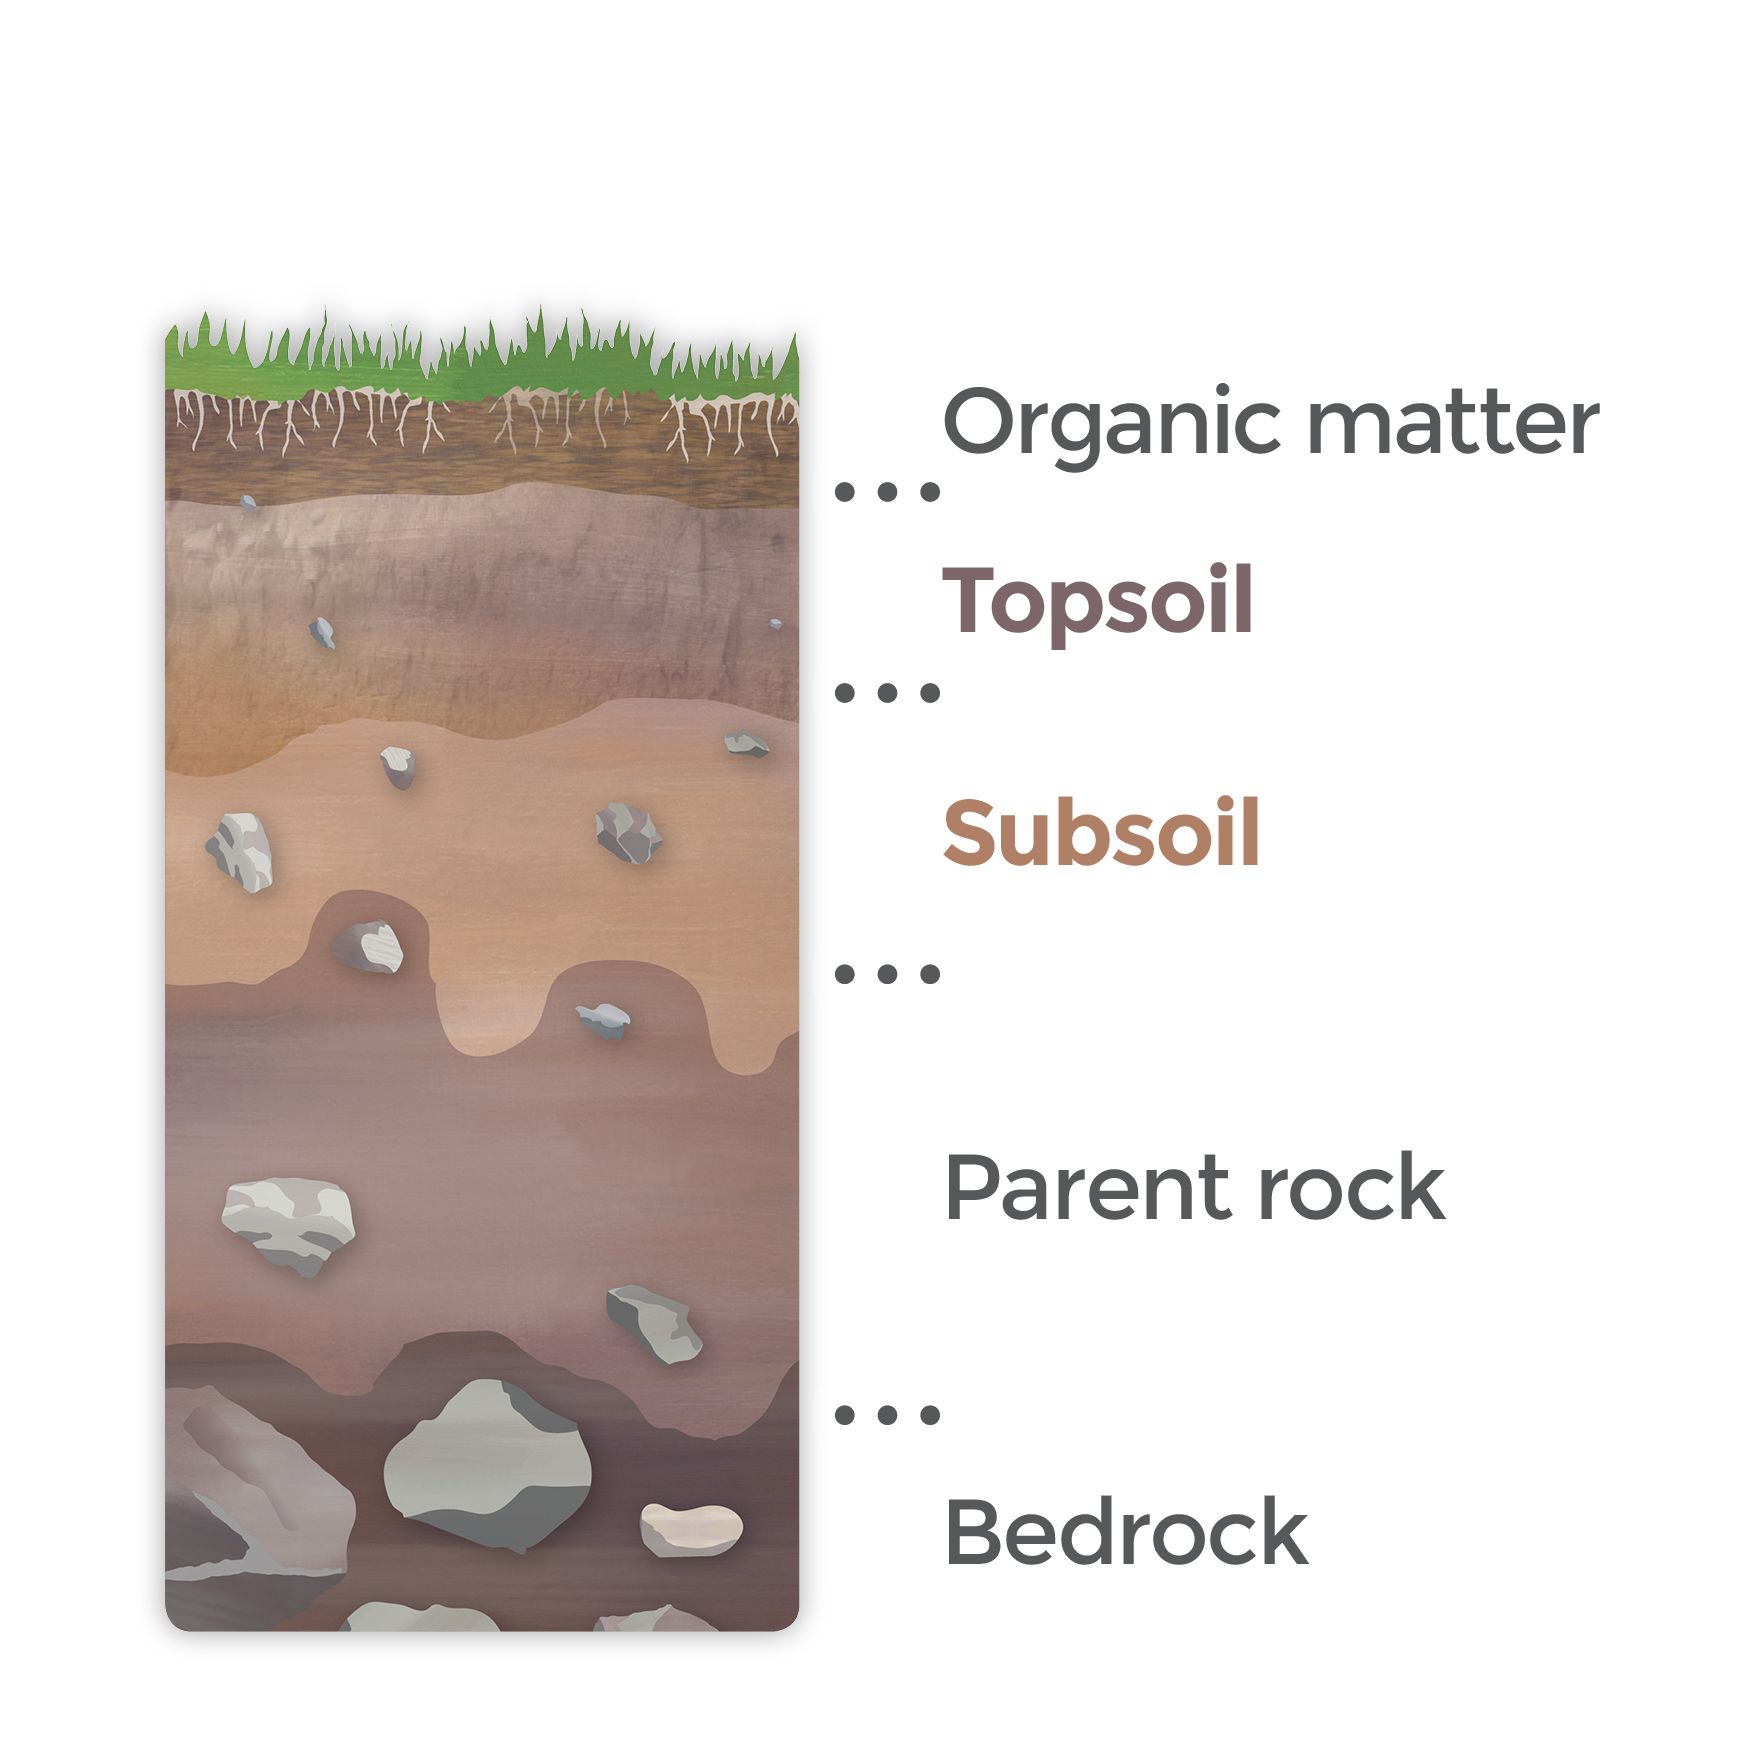 Topsoil and subsoil - Graphic